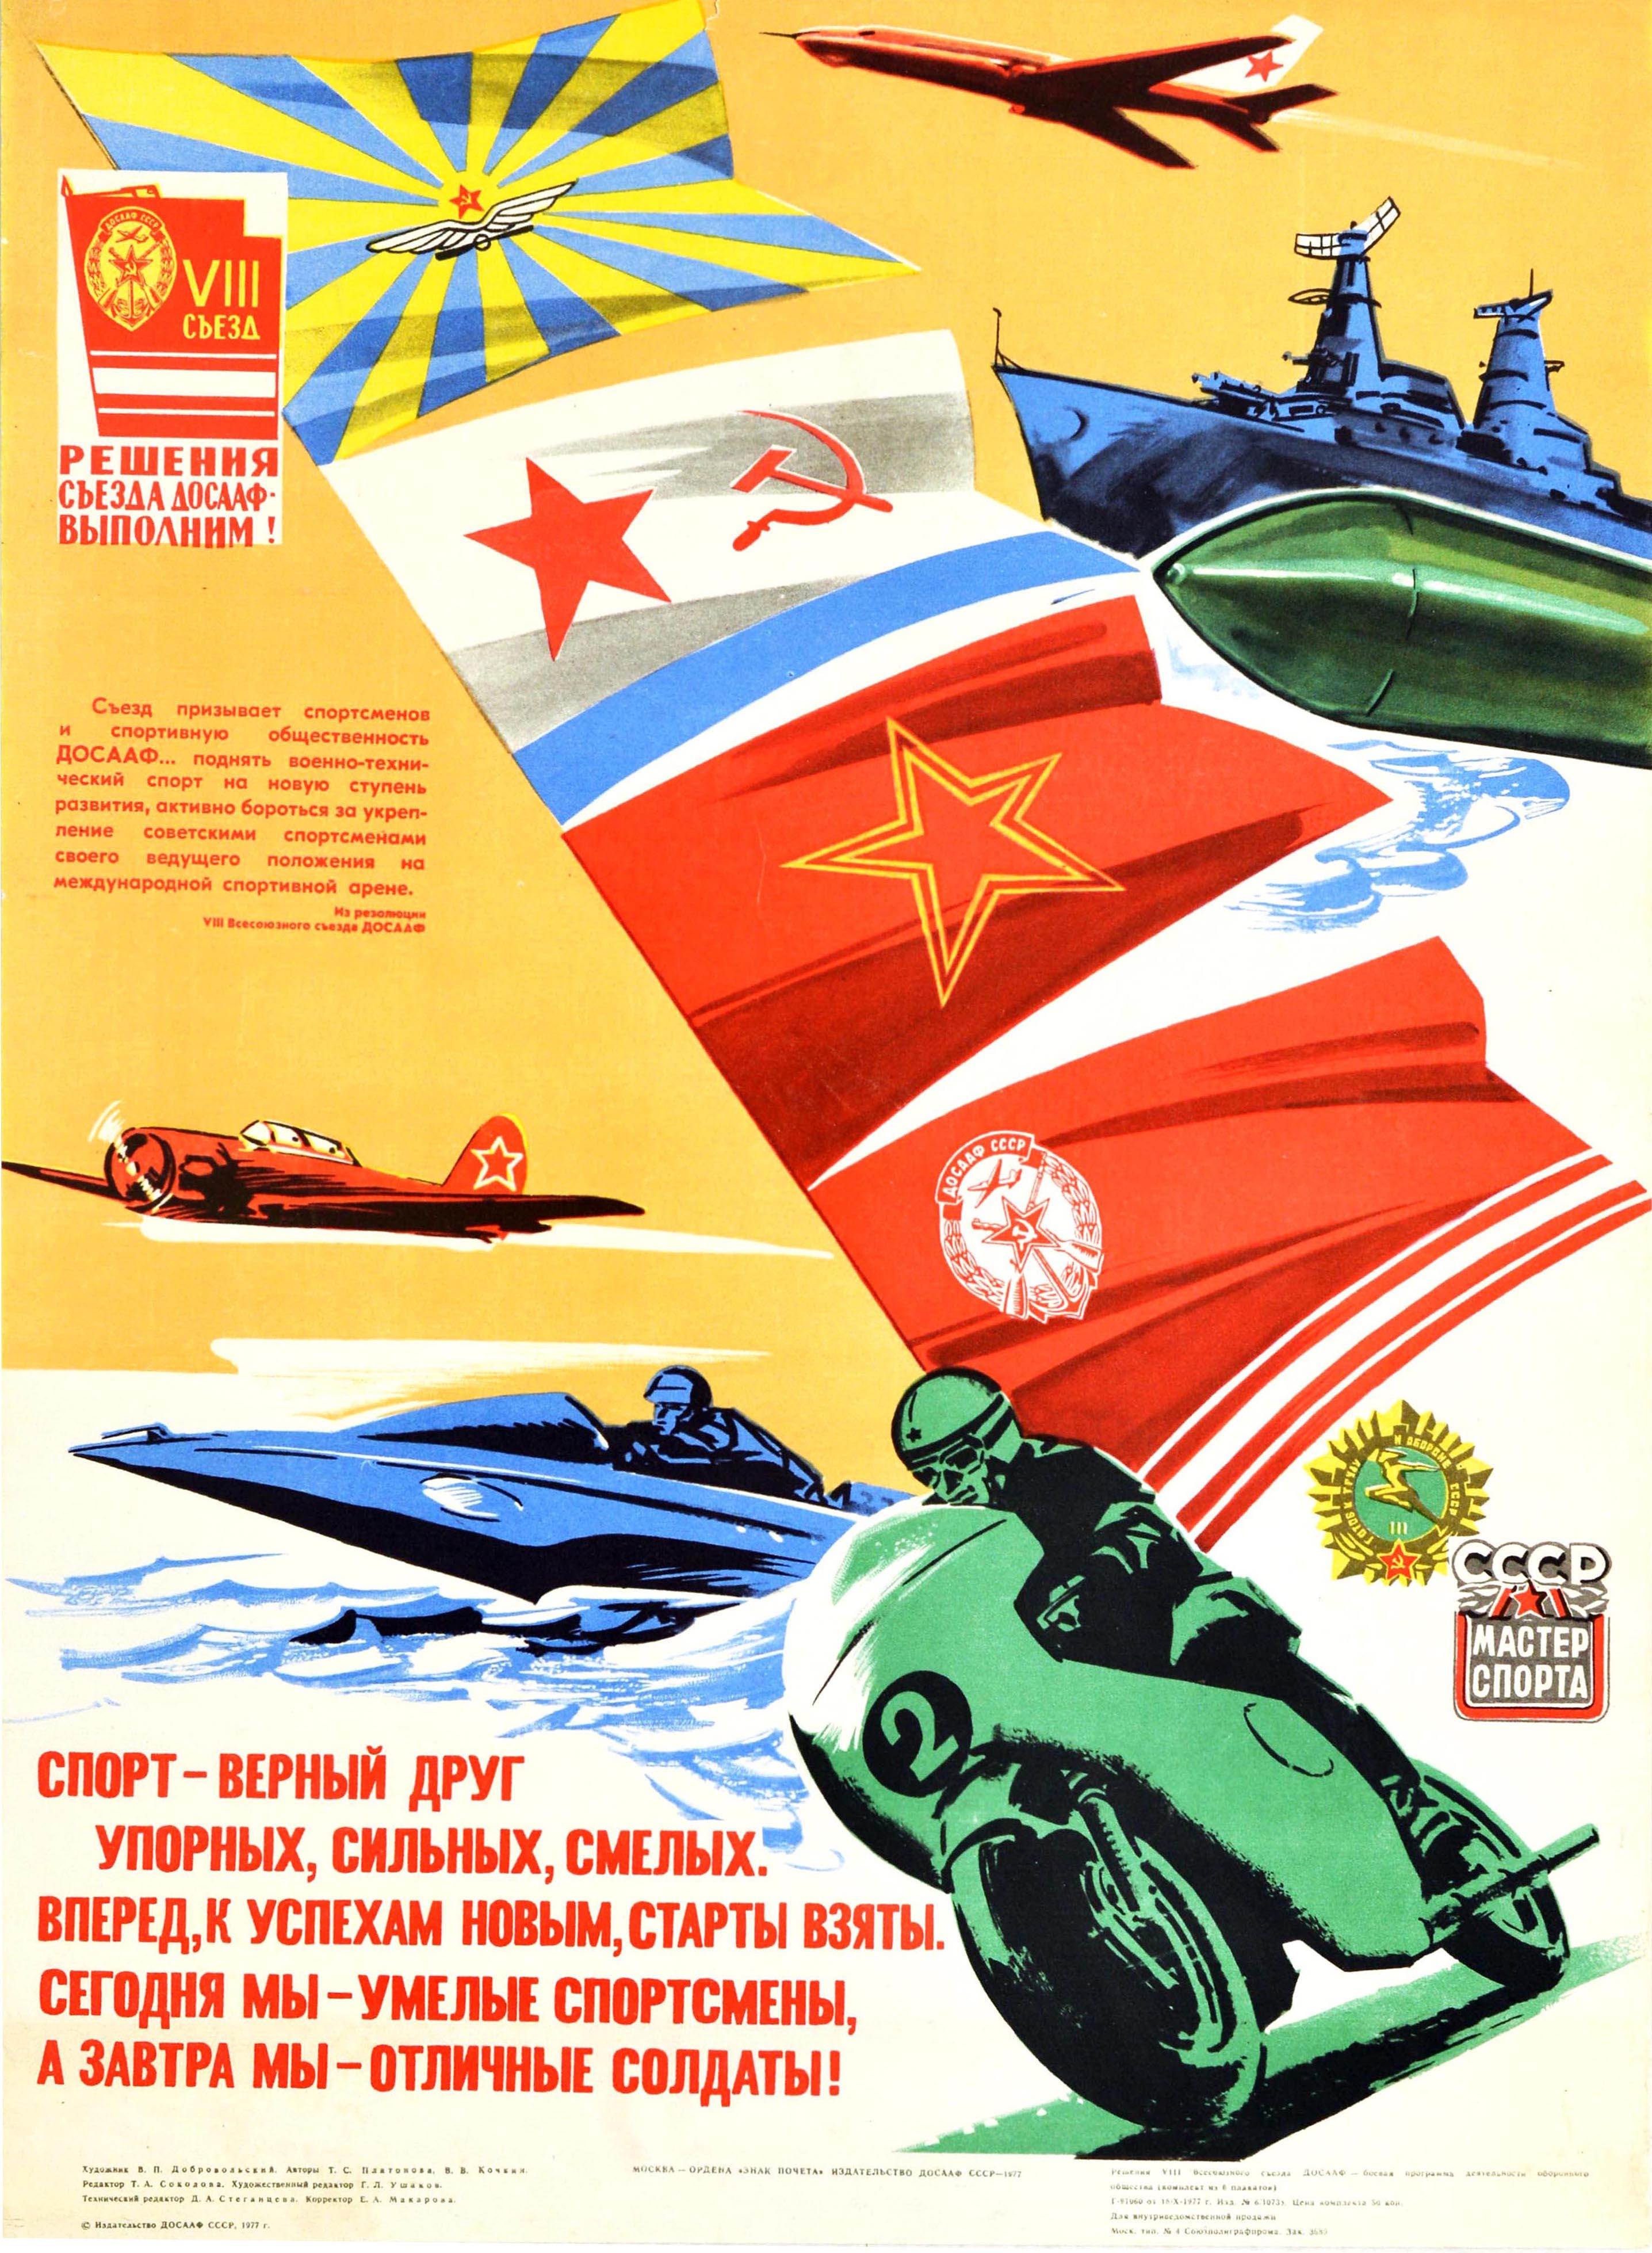 Original vintage Soviet propaganda poster promoting sport issued by DOSAAF (Dosaaf; the Volunteer Society for Cooperation with the Army, Aviation and Navy) for the VIII Congress of the Communist Party of the Soviet Union. The text reads: Sport is a